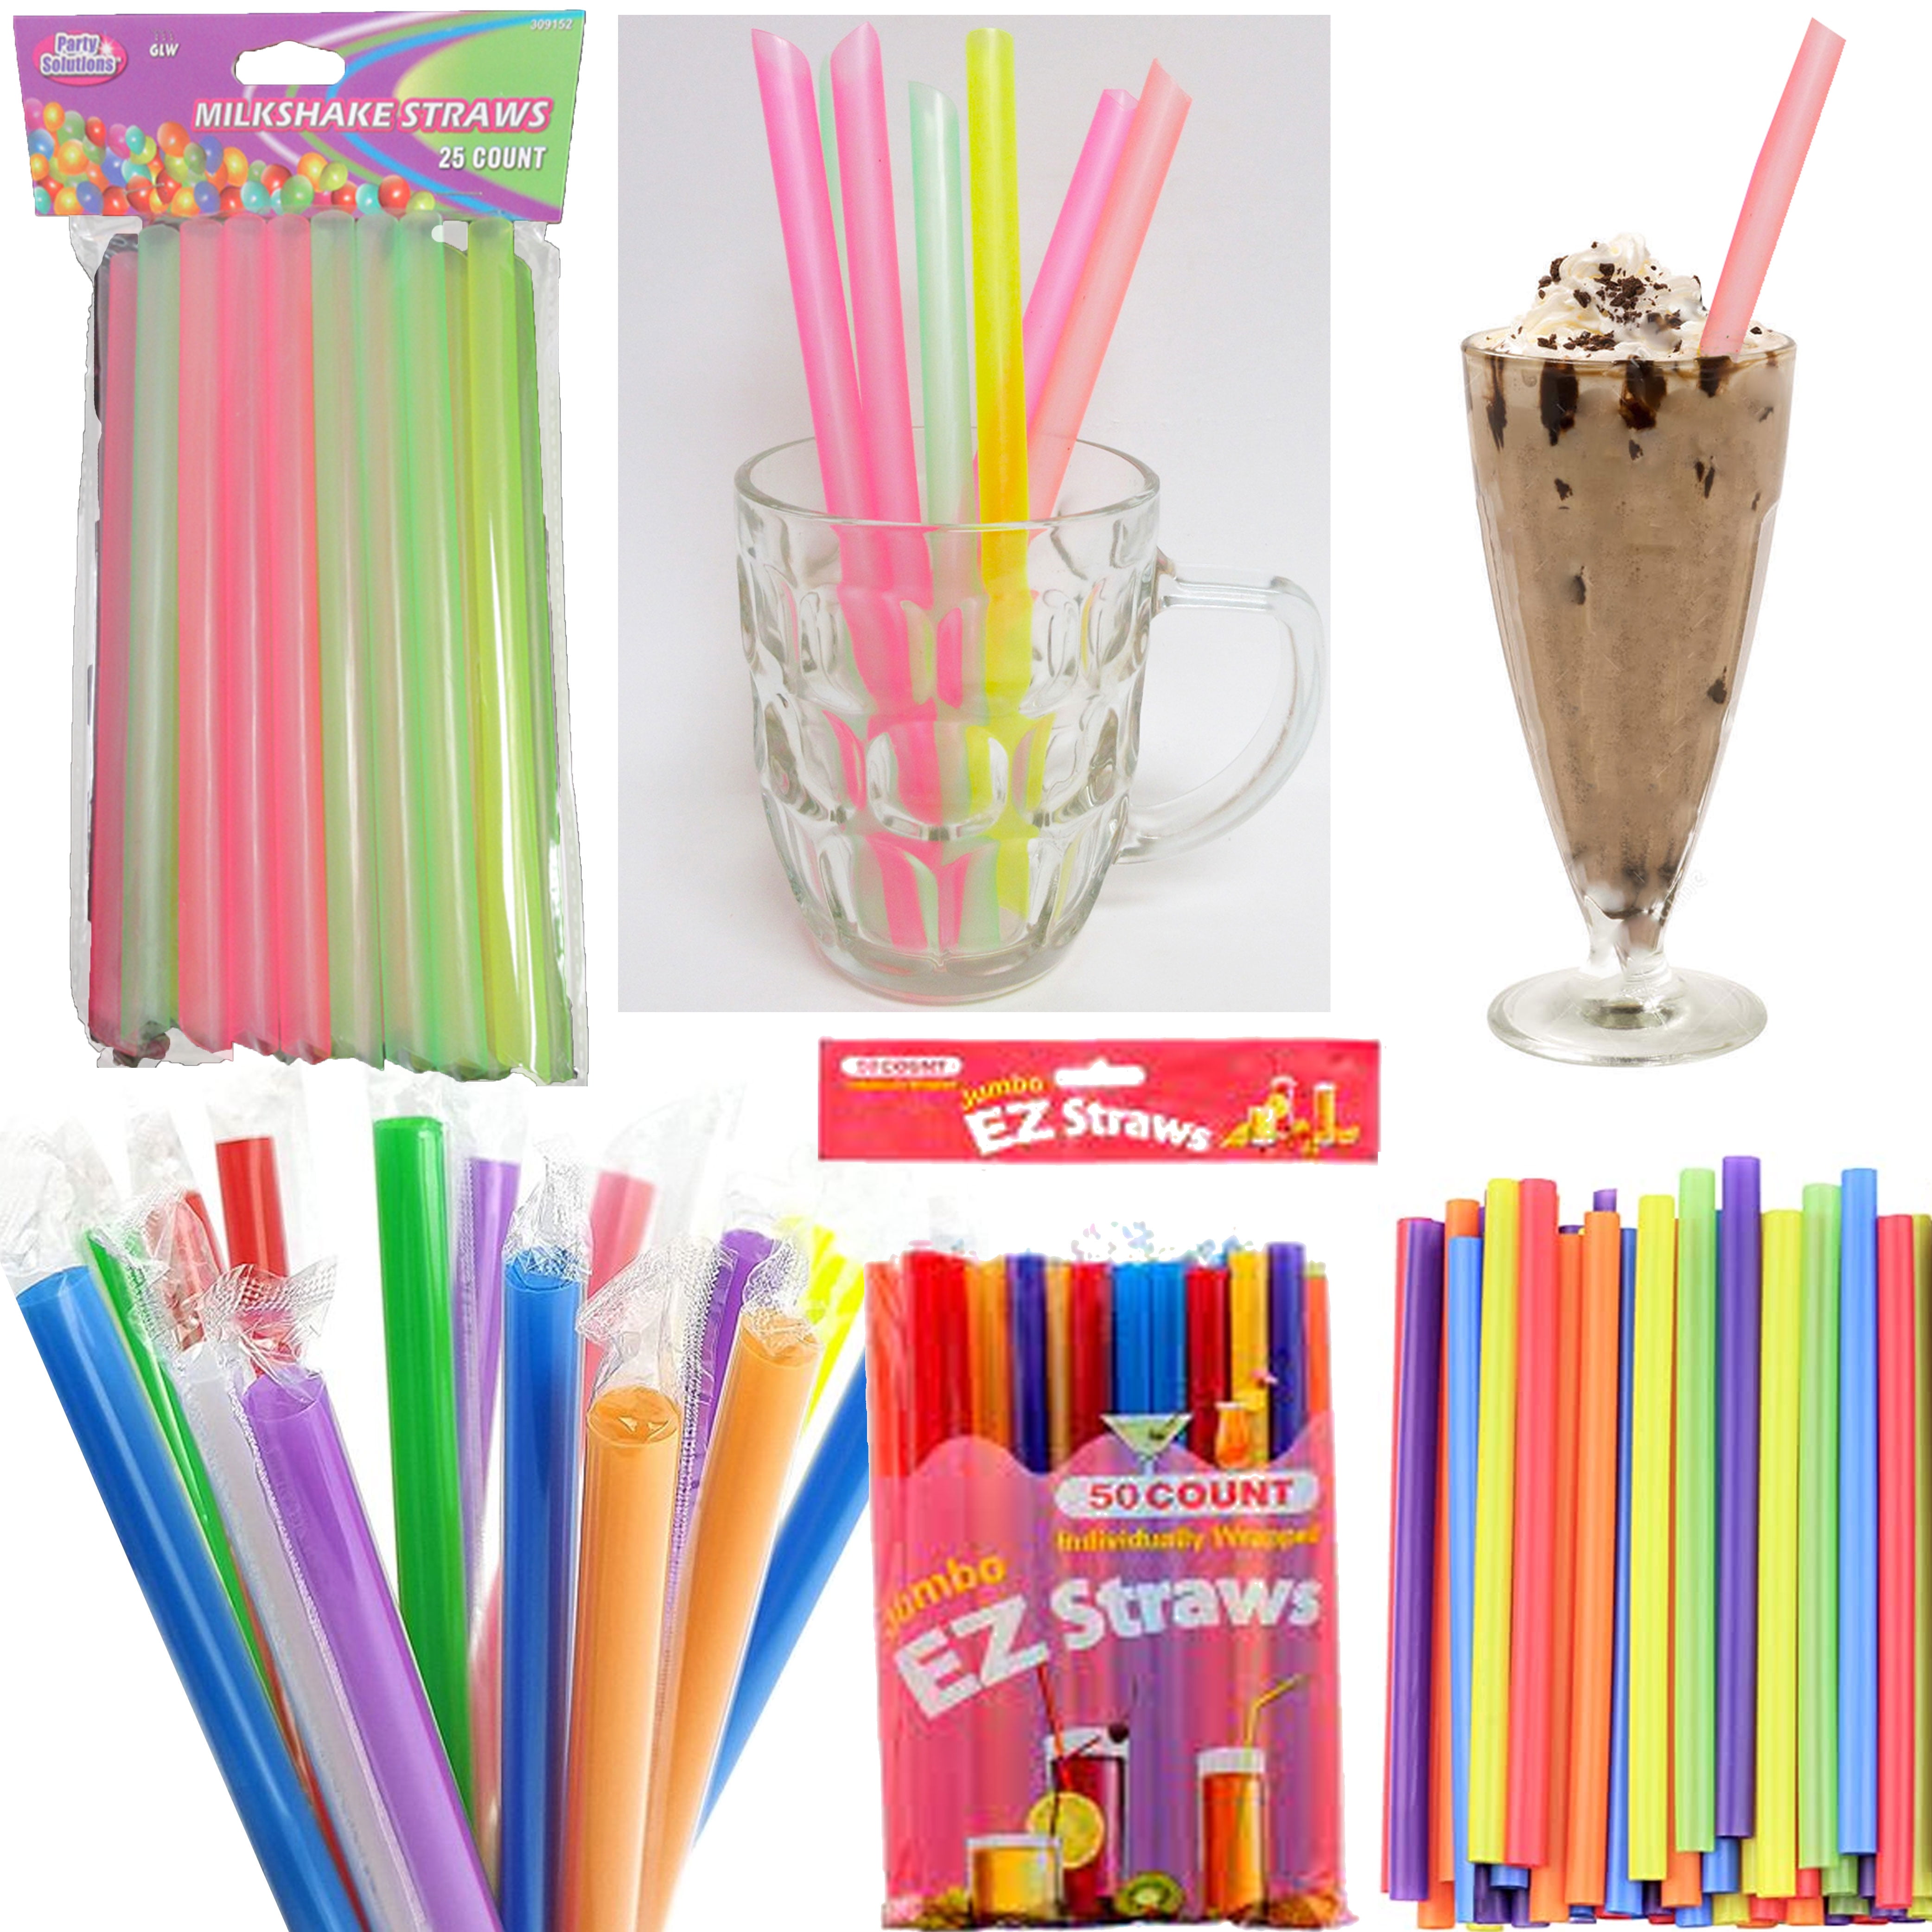 OAVQHLG3B 25 Pack Reusable Hard Drinking Straws Rainbow Colored Drinking  Straws,9 Inch Long Plastic Replacement Straws 